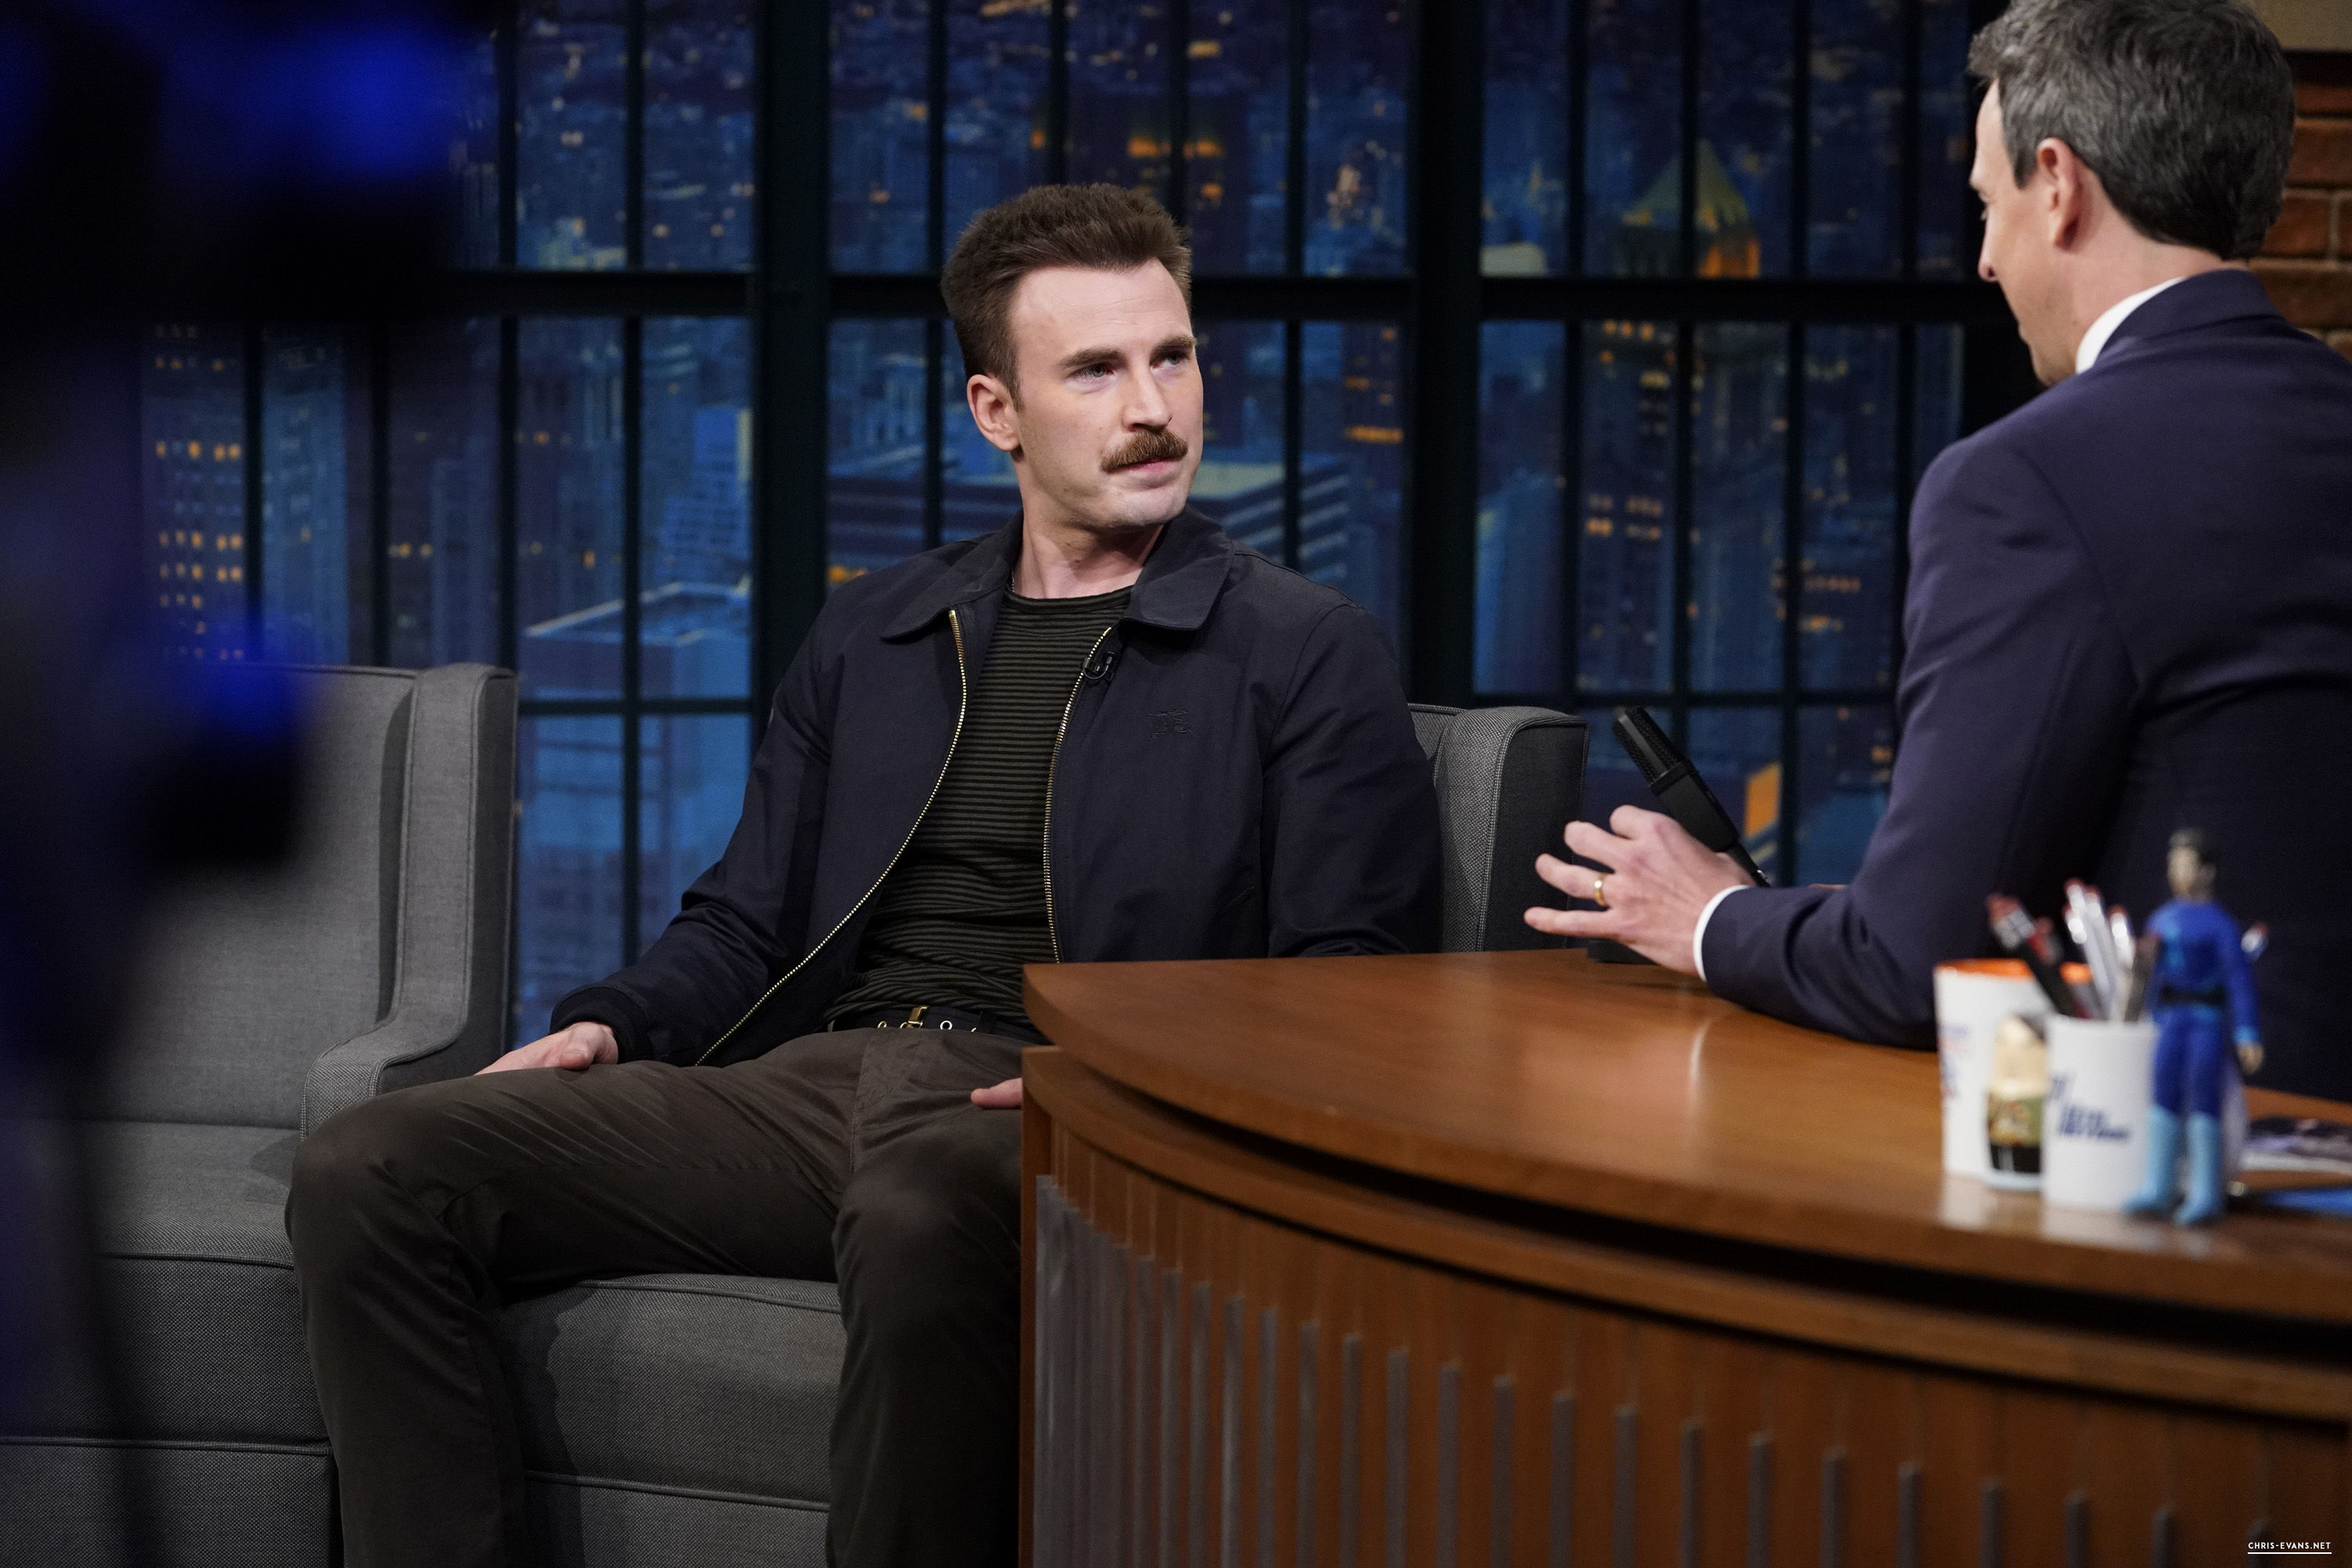 http://chris-evans.net/photos/albums/Appearances/2018/04%2023%20Late%20Night%20with%20Seth%20Meyers/004.jpg